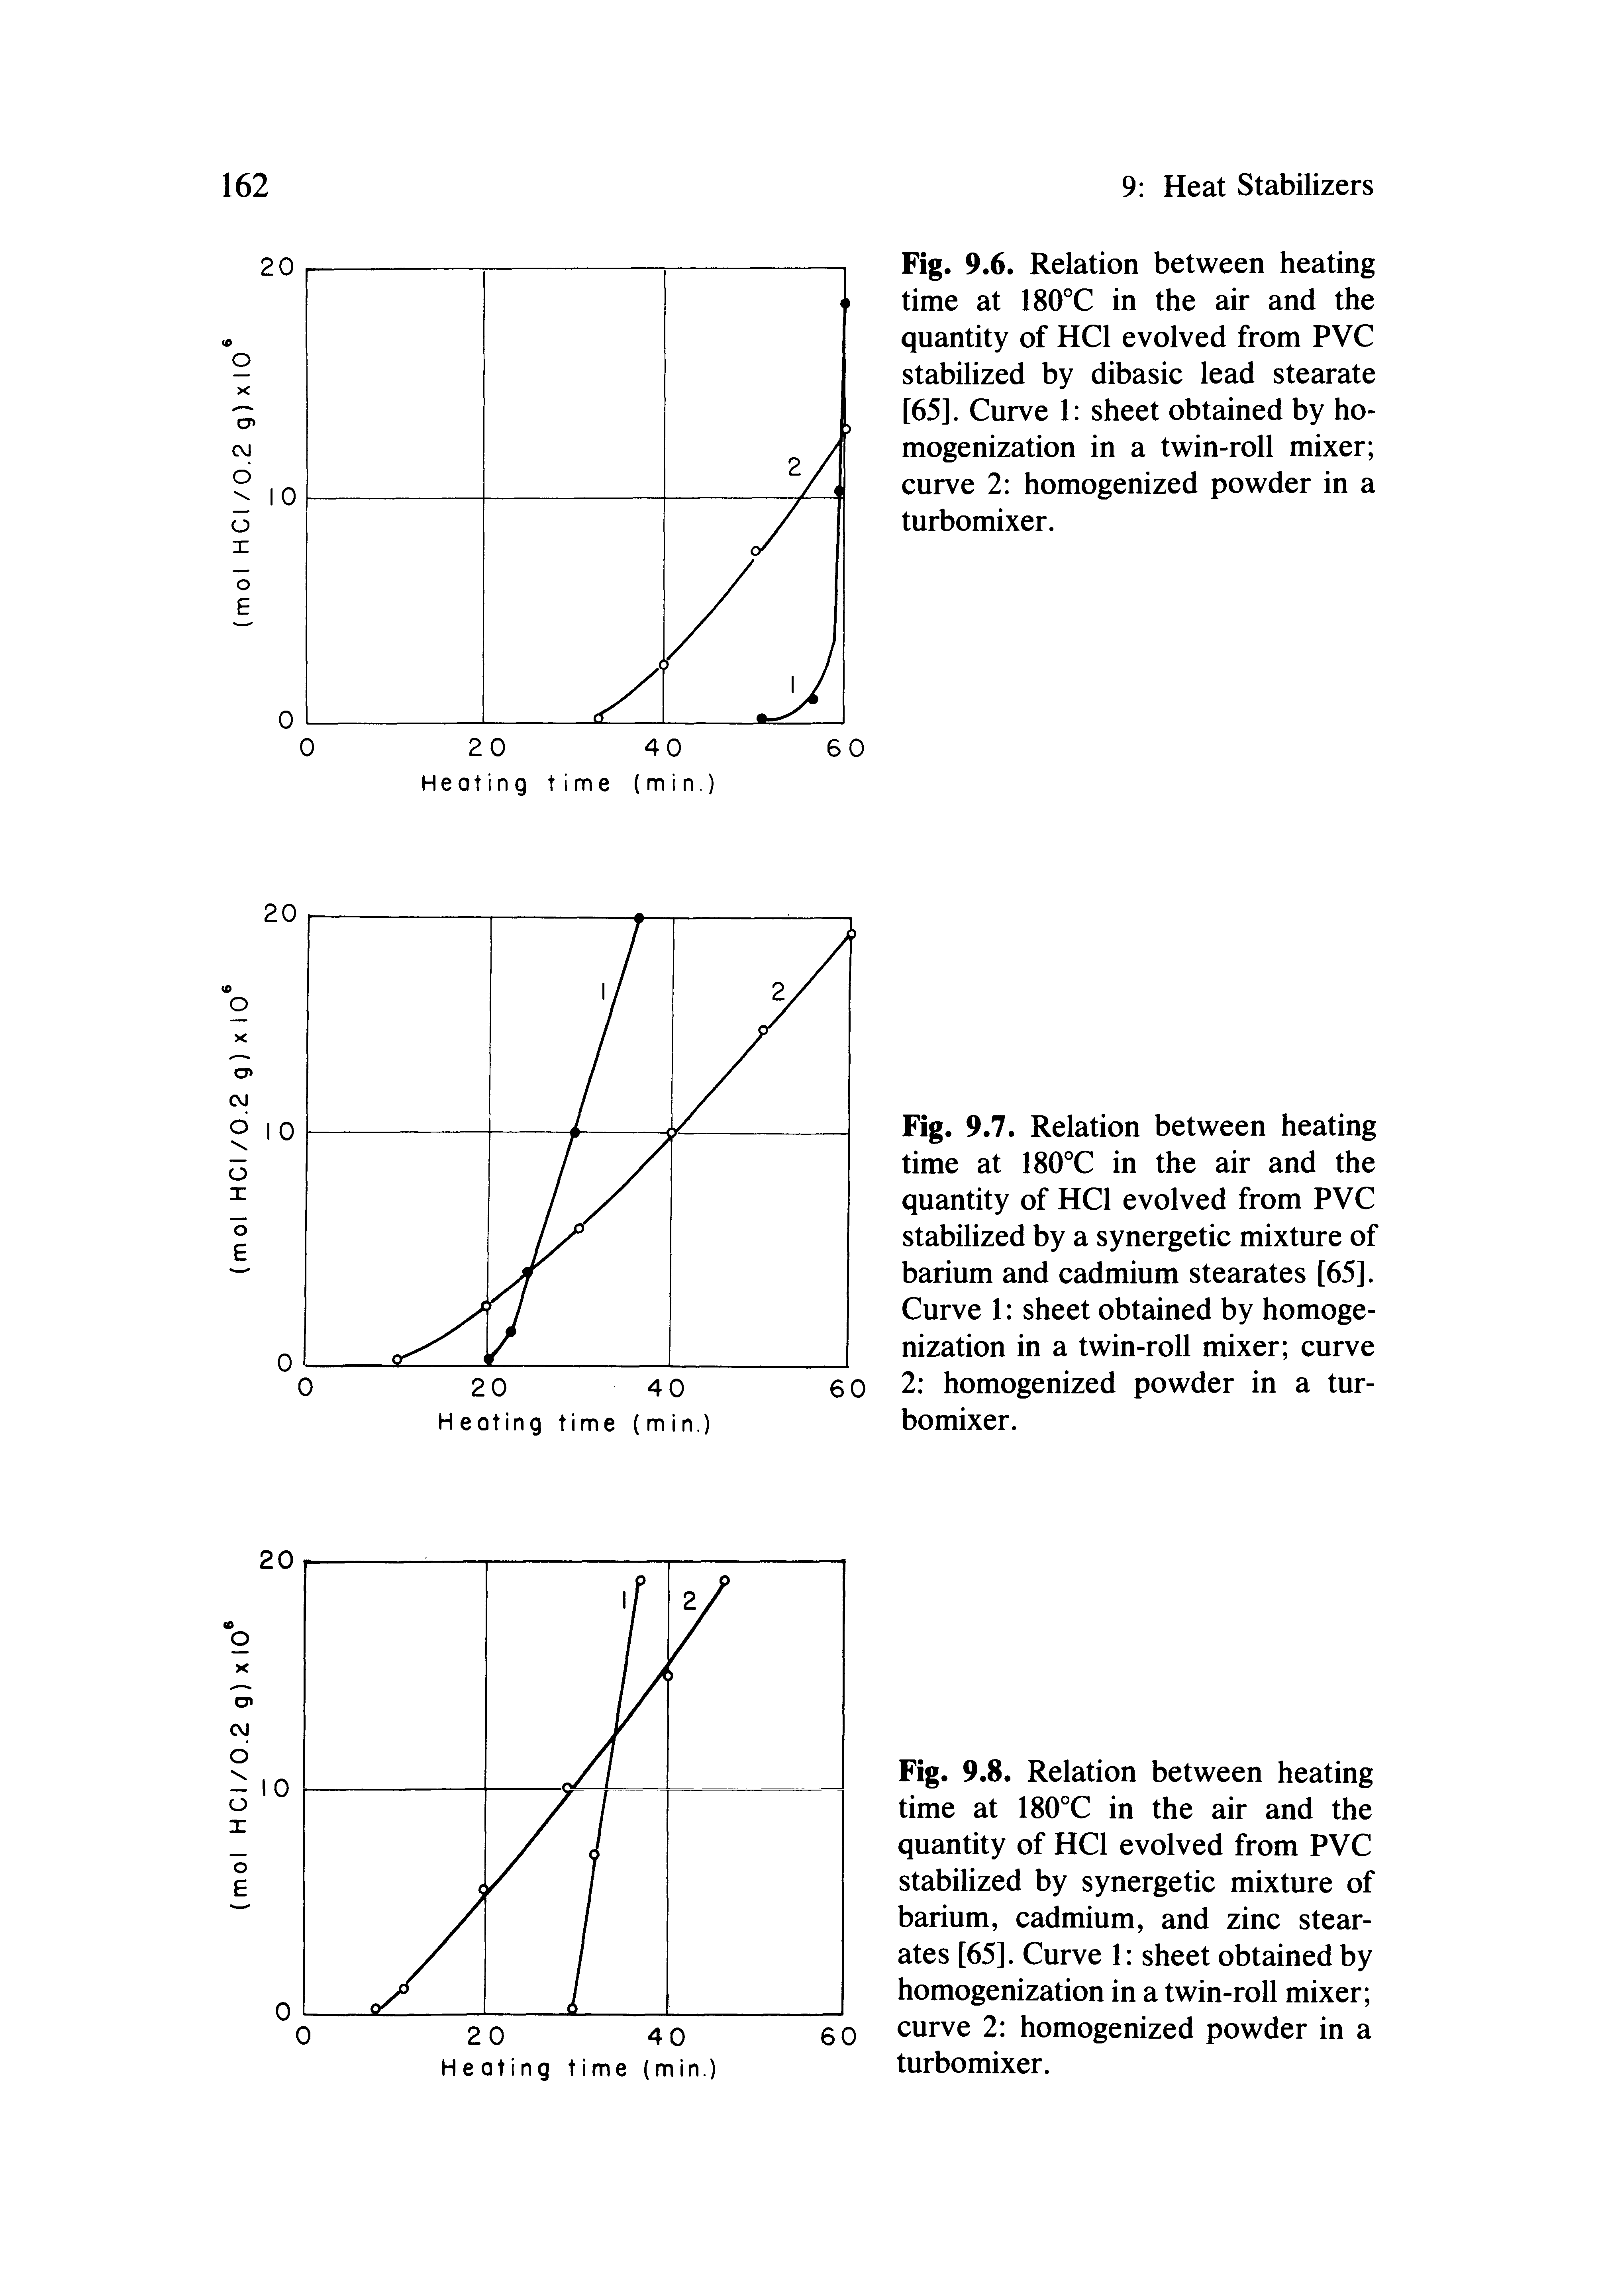 Fig. 9.7. Relation between heating time at 180°C in the air and the quantity of HCl evolved from PVC stabilized by a synergetic mixture of barium and cadmium stearates [65]. Curve 1 sheet obtained by homogenization in a twin-roll mixer curve 2 homogenized powder in a turbomixer.